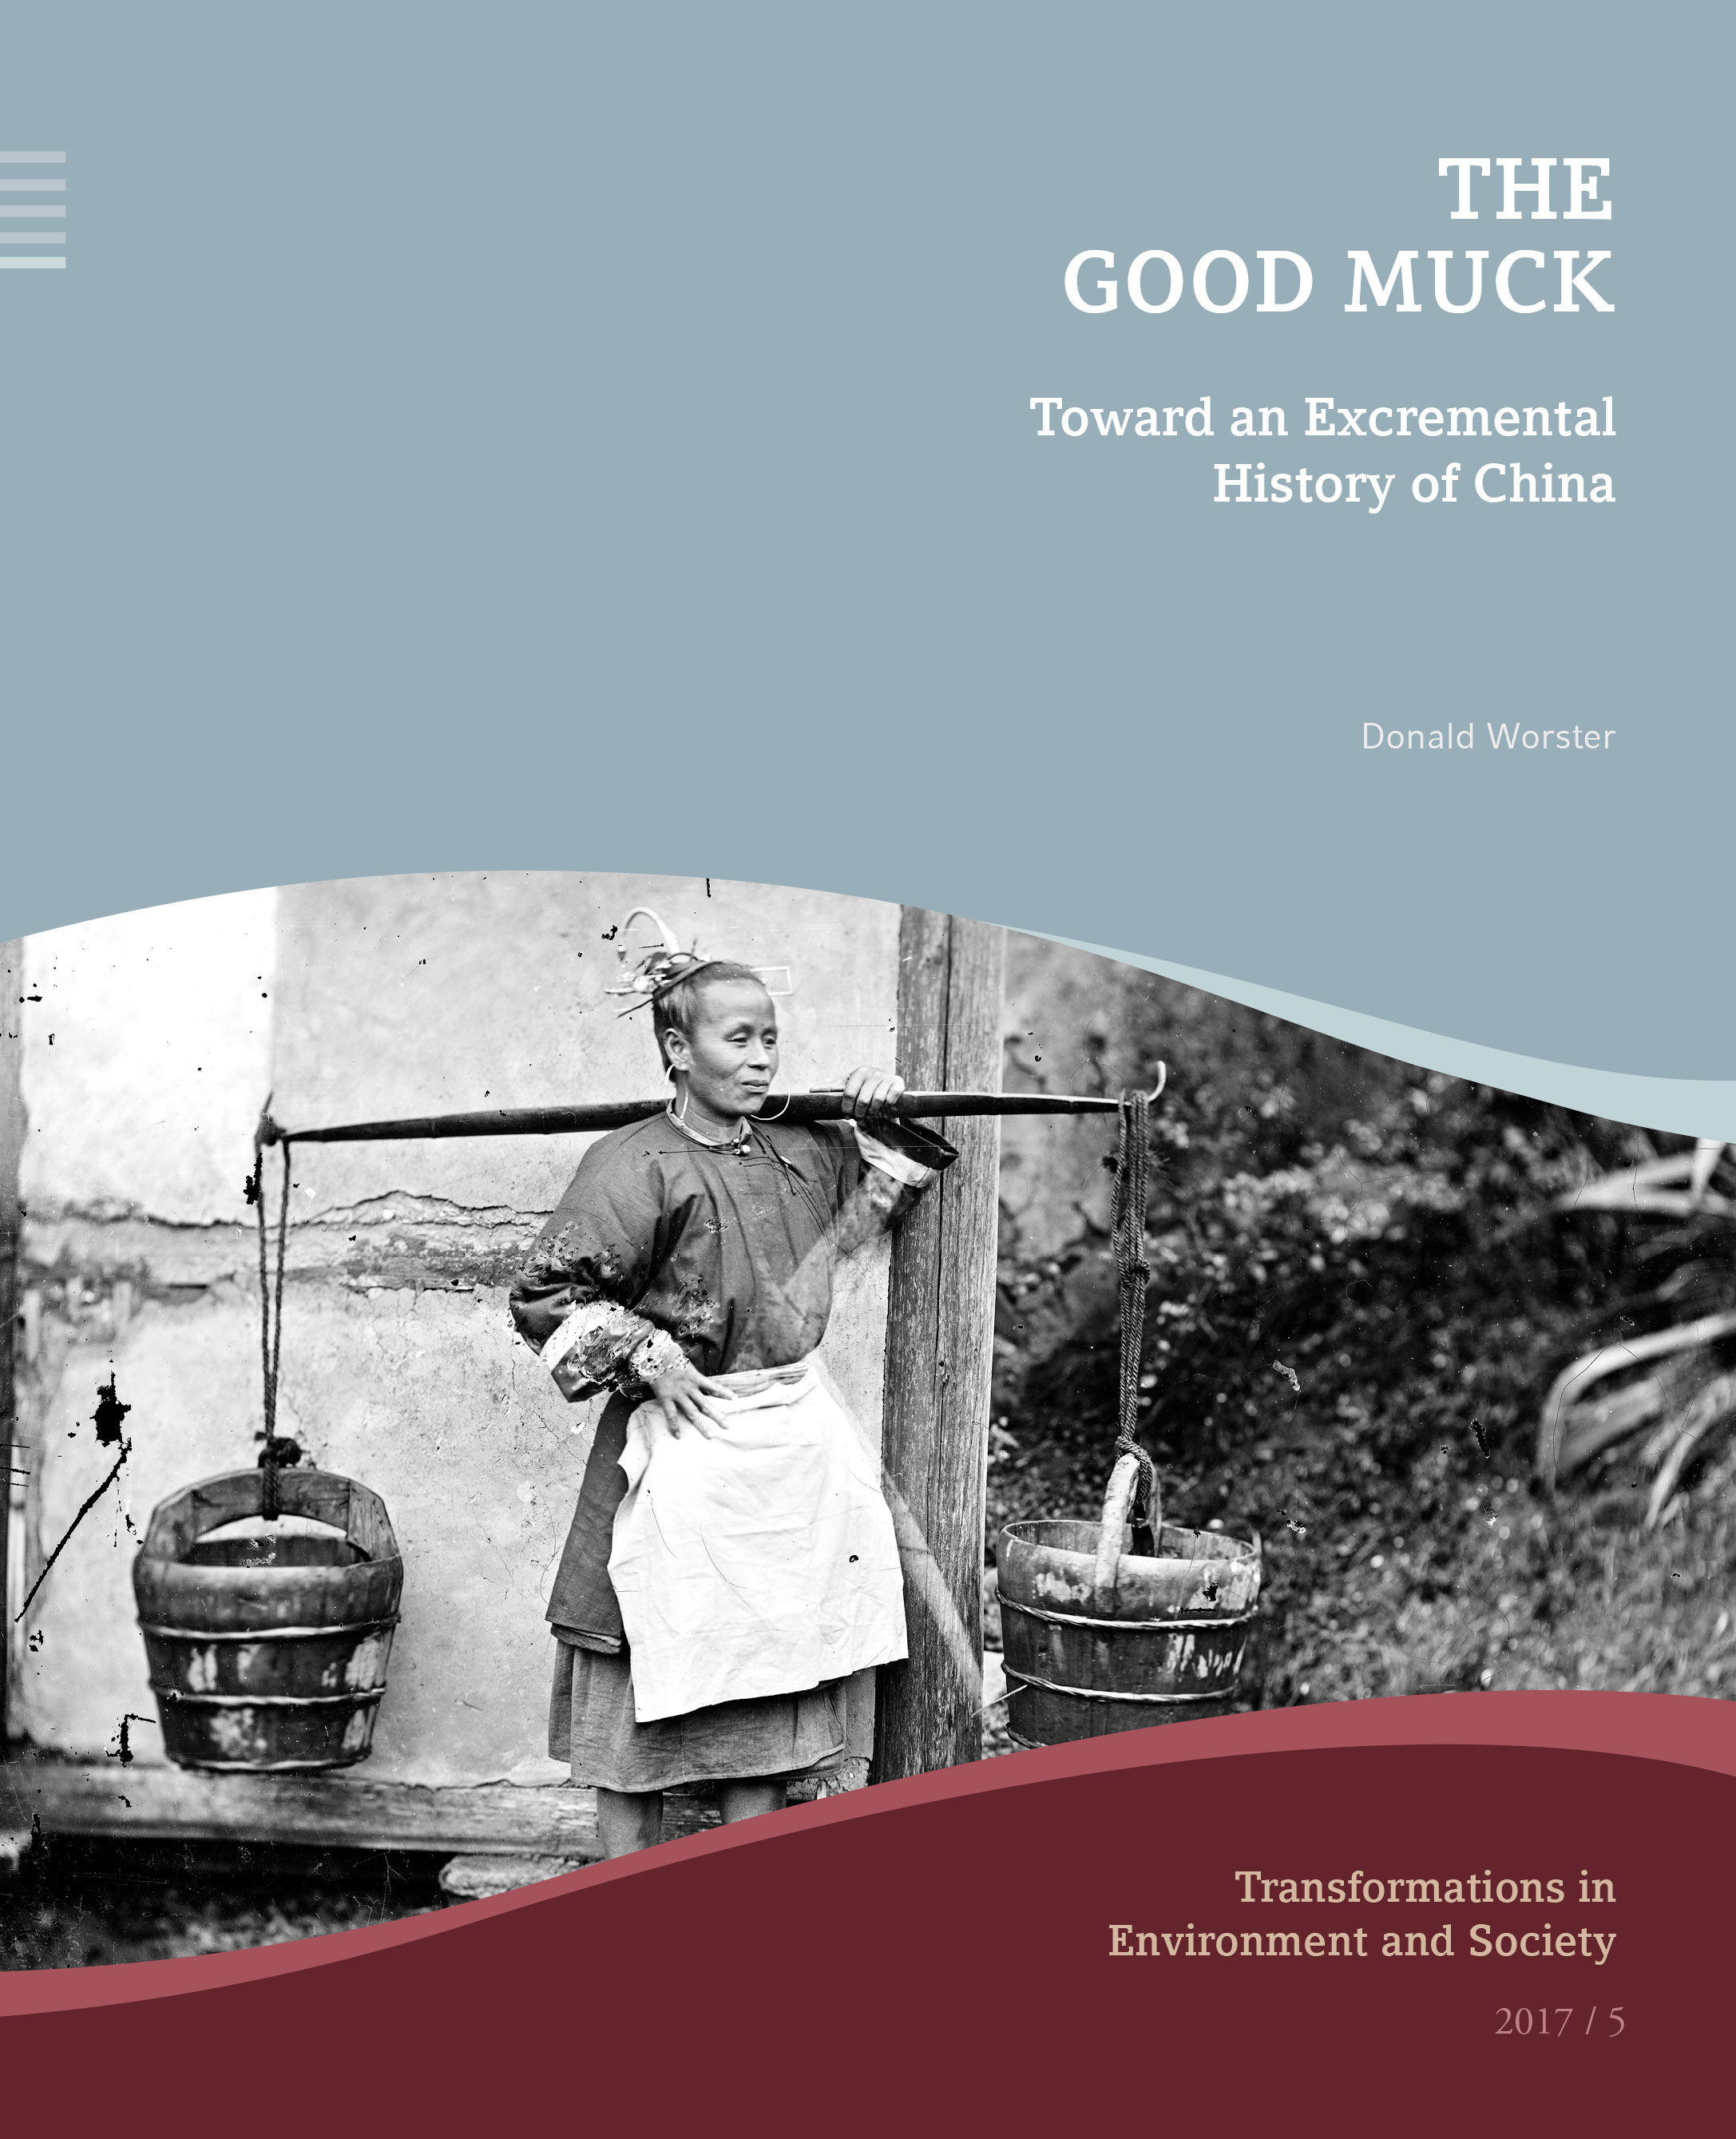 The Good Muck Toward an Excremental History of China Environment